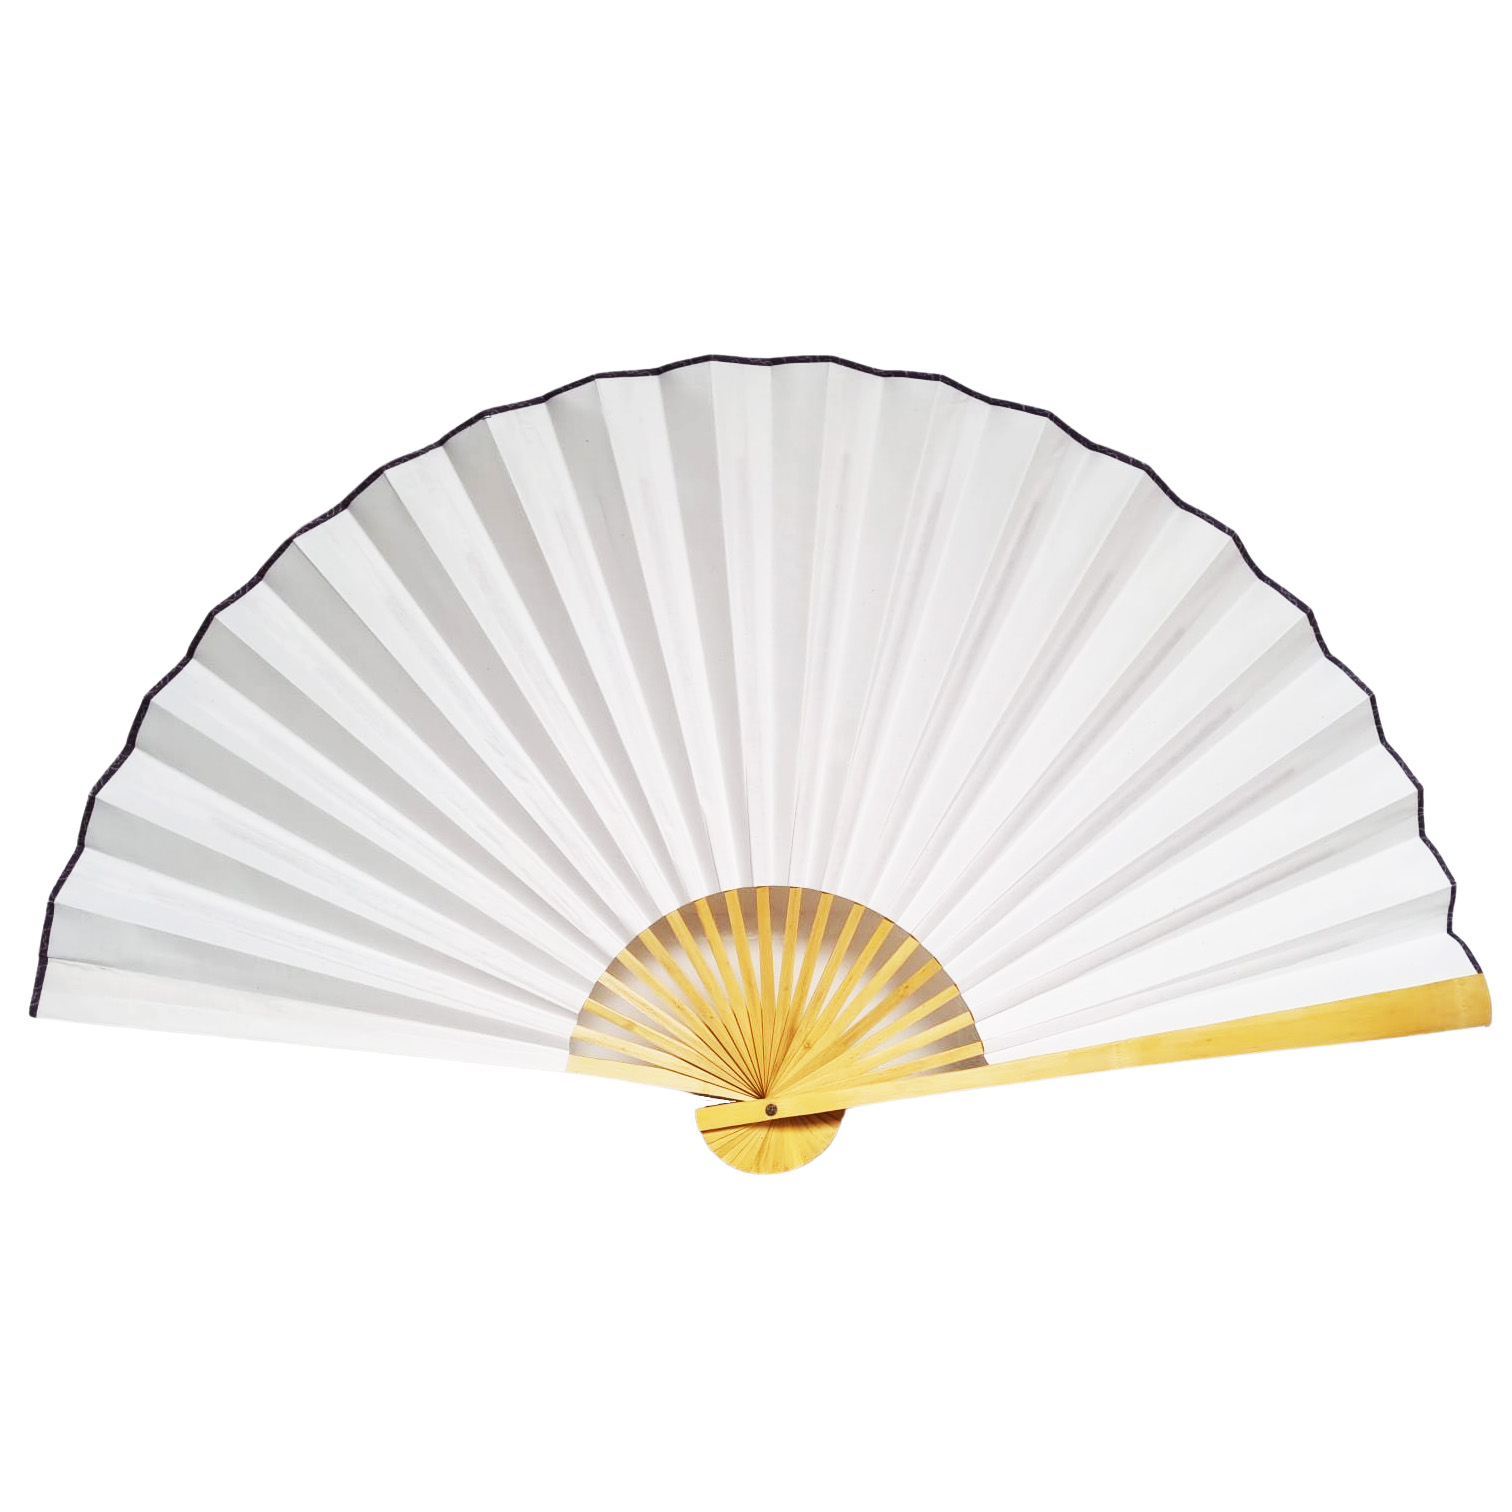 Chinese fan for sauna air movement